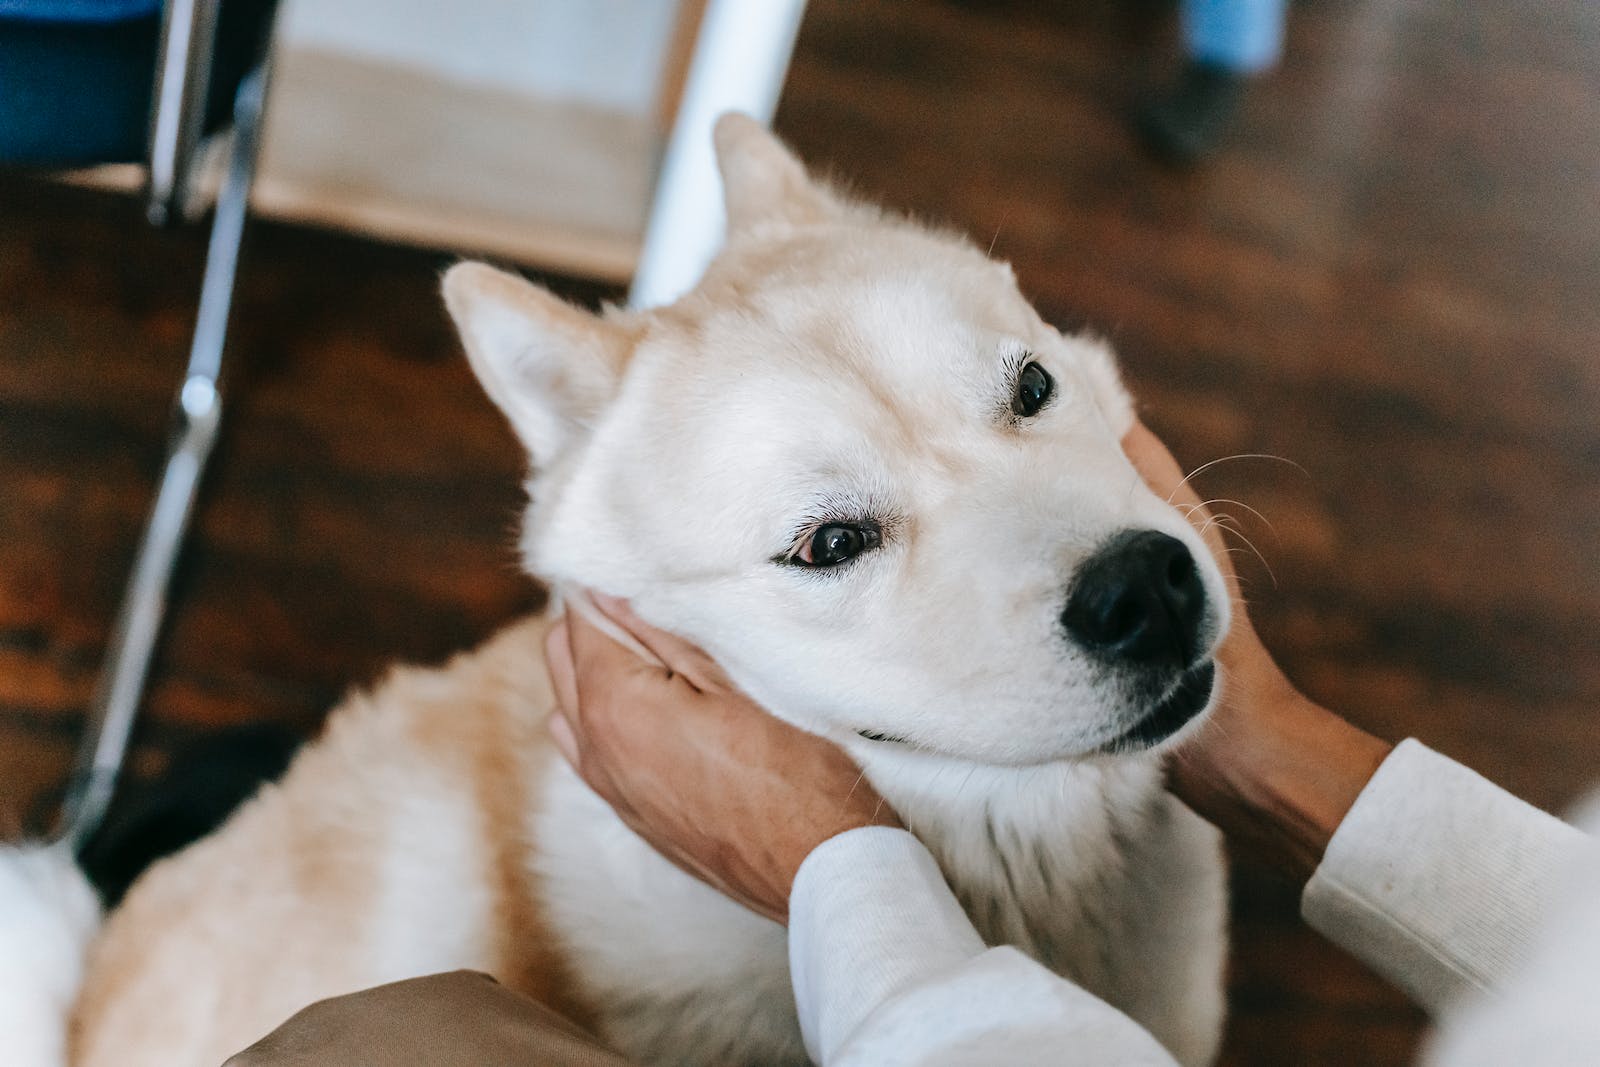 ways to talk to your dog that will make your dog happy